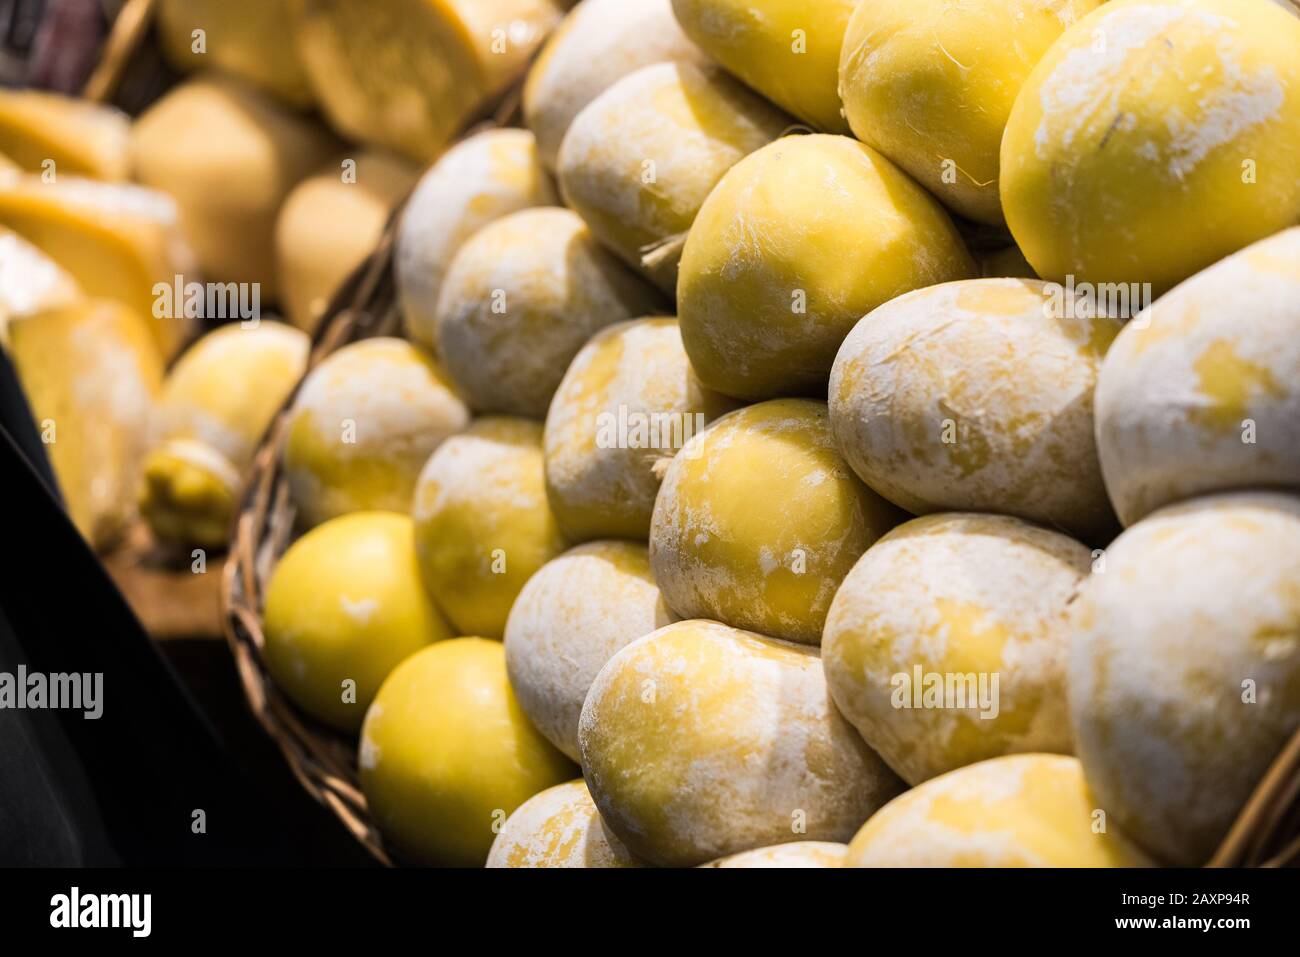 photography Cuisine scamorza Alamy - images hi-res and stock